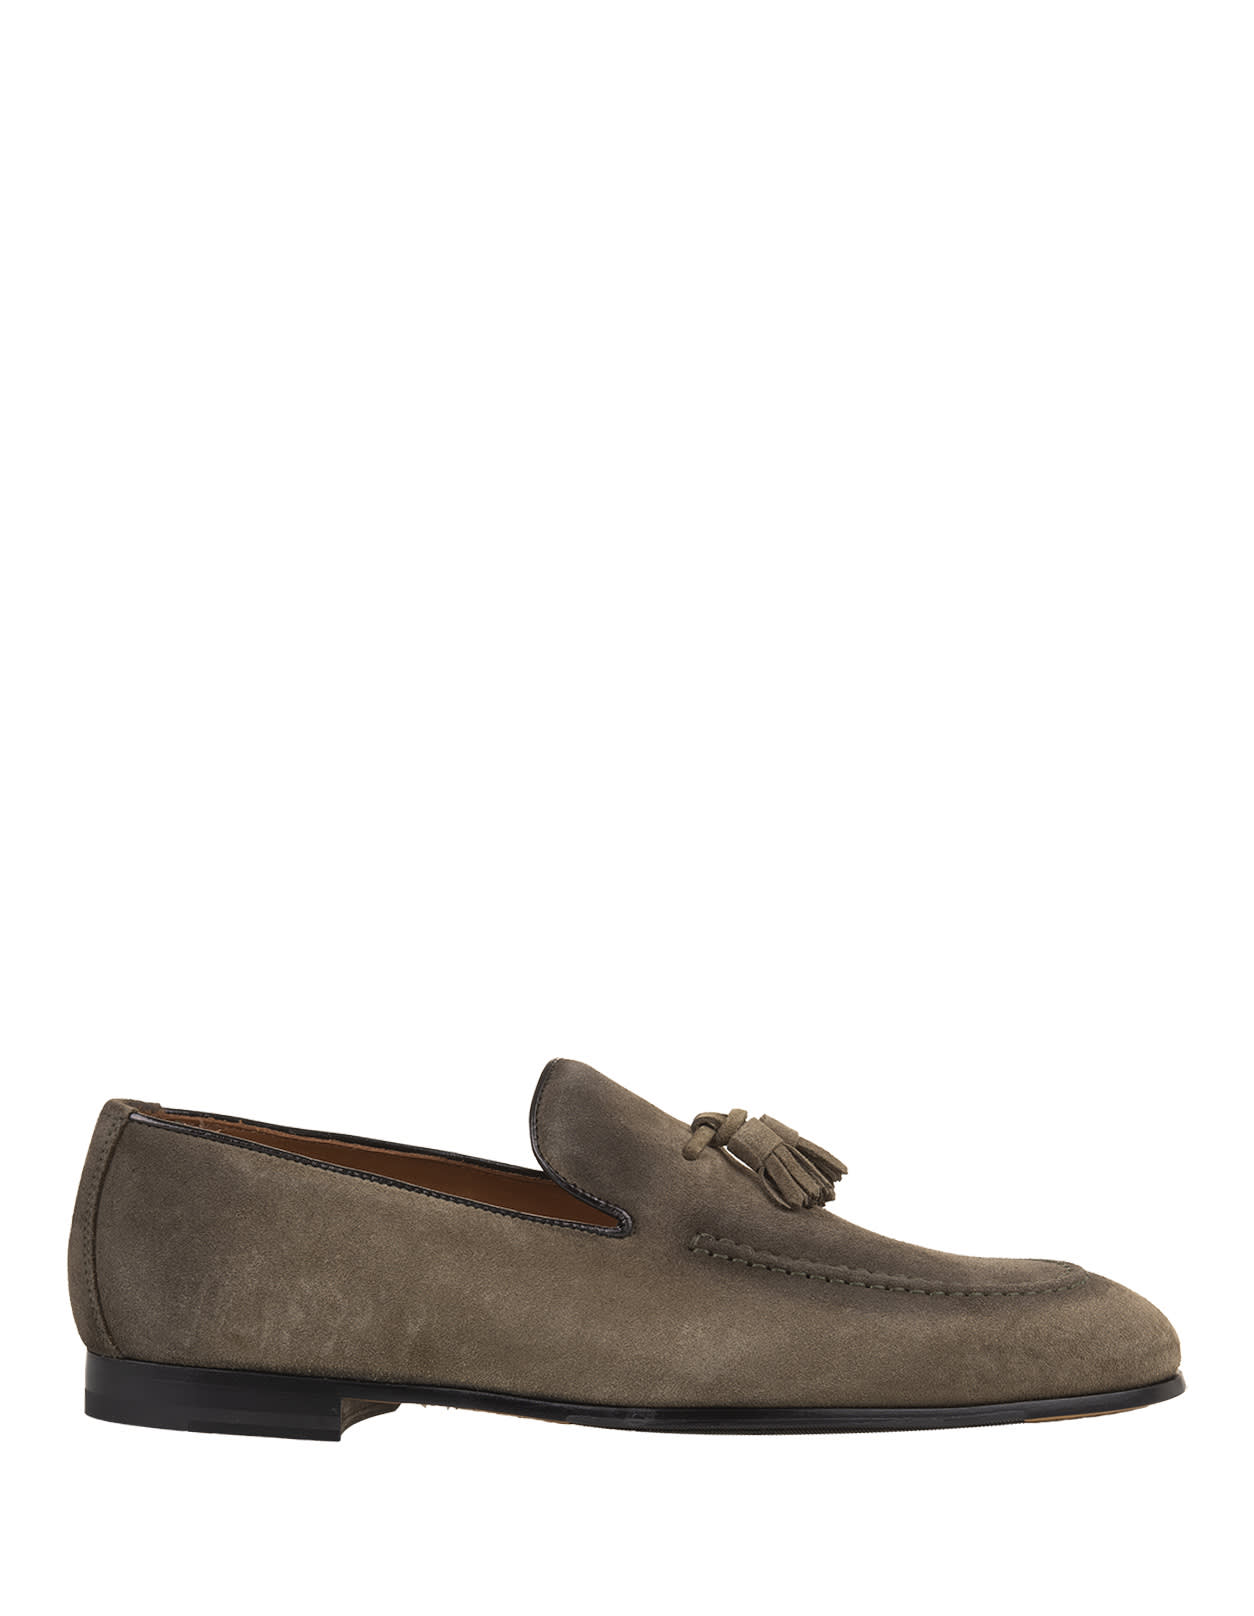 Mud Suede Loafers With Tassels